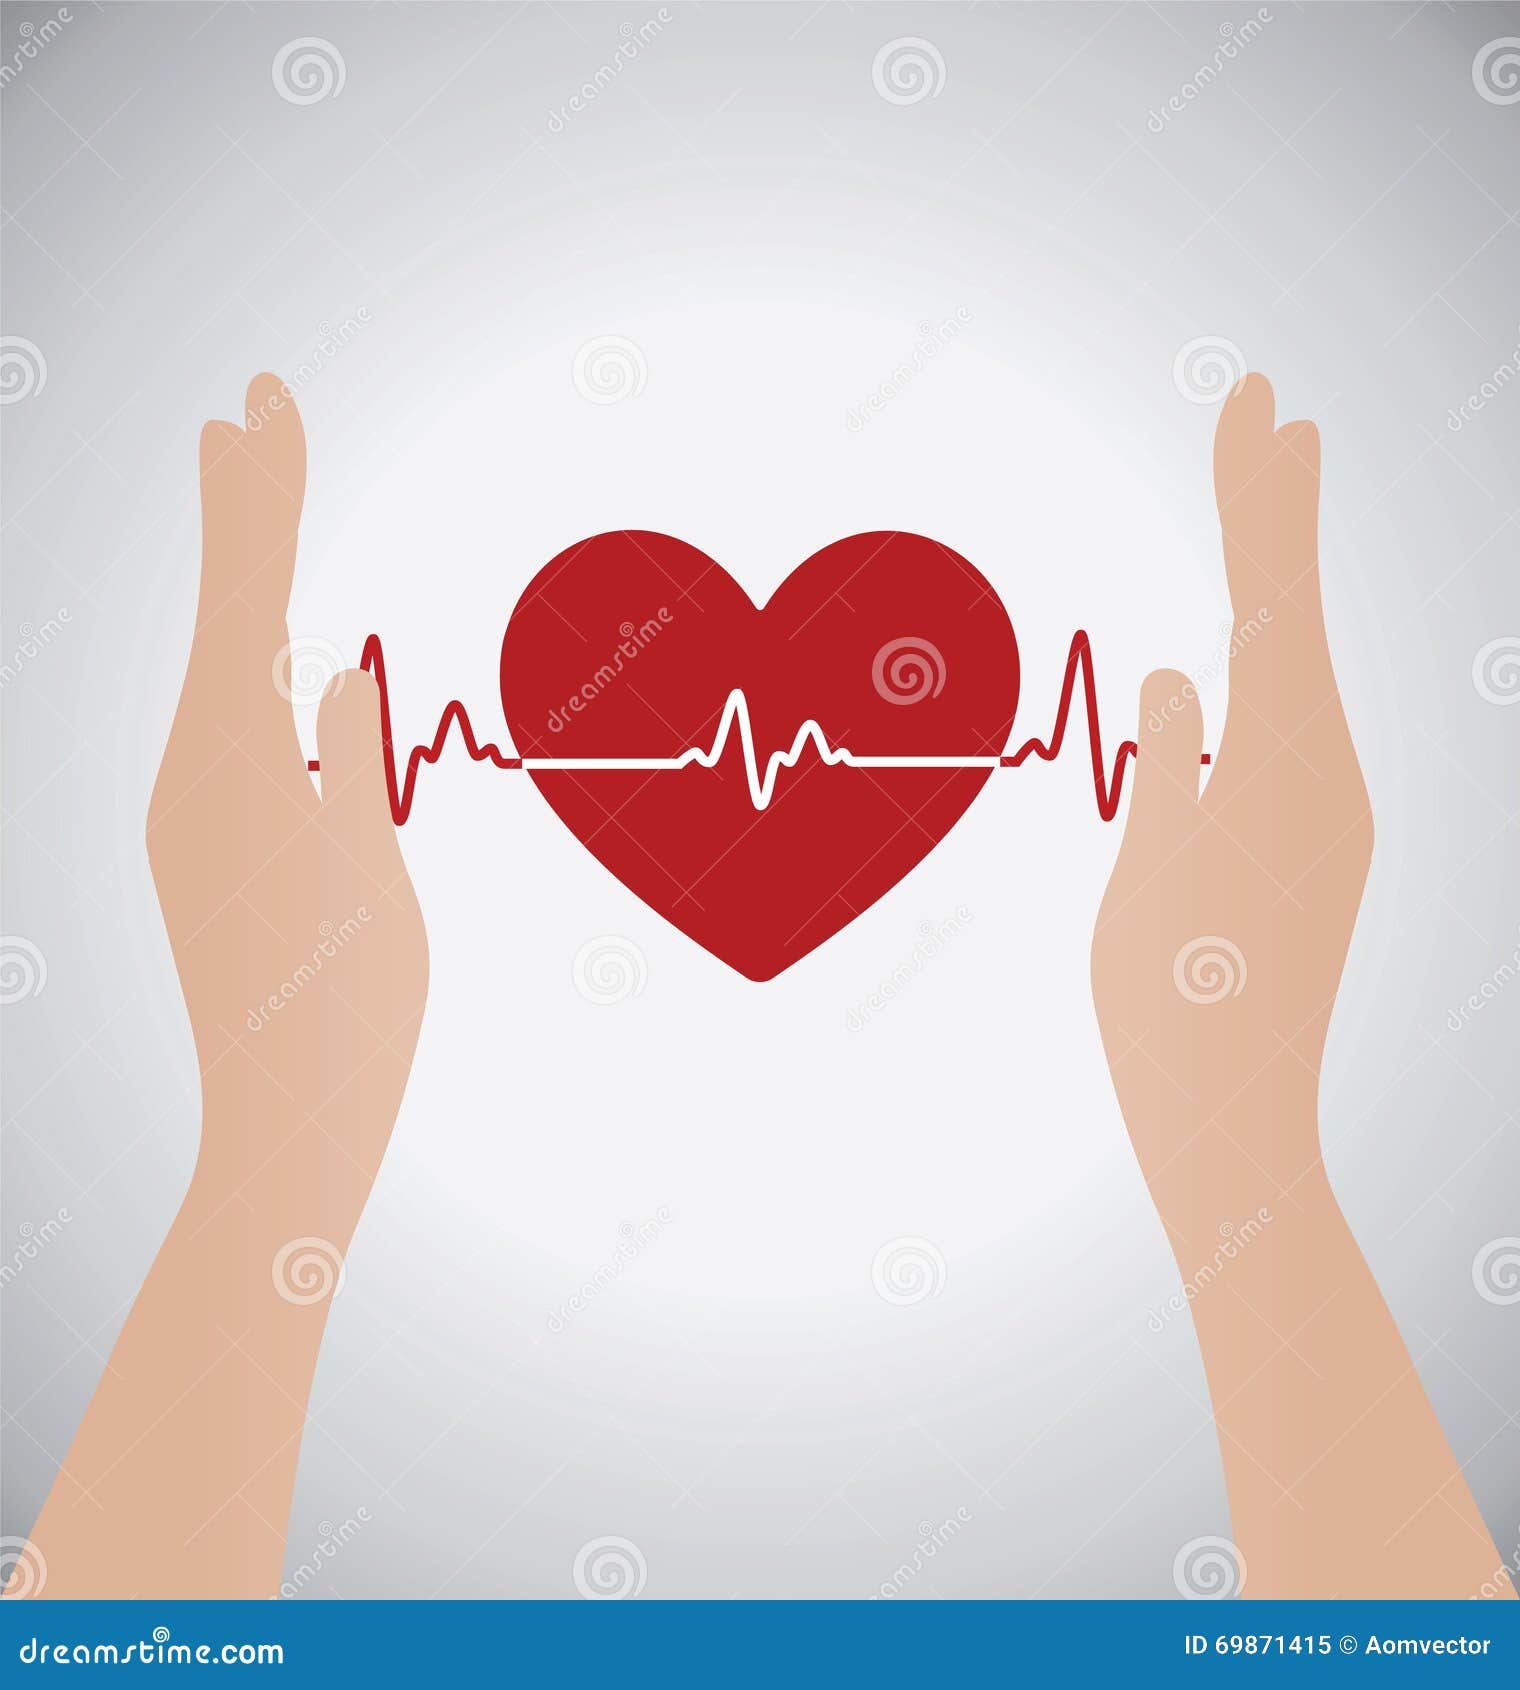 hands holding heart of heartbeat electrocardiograph